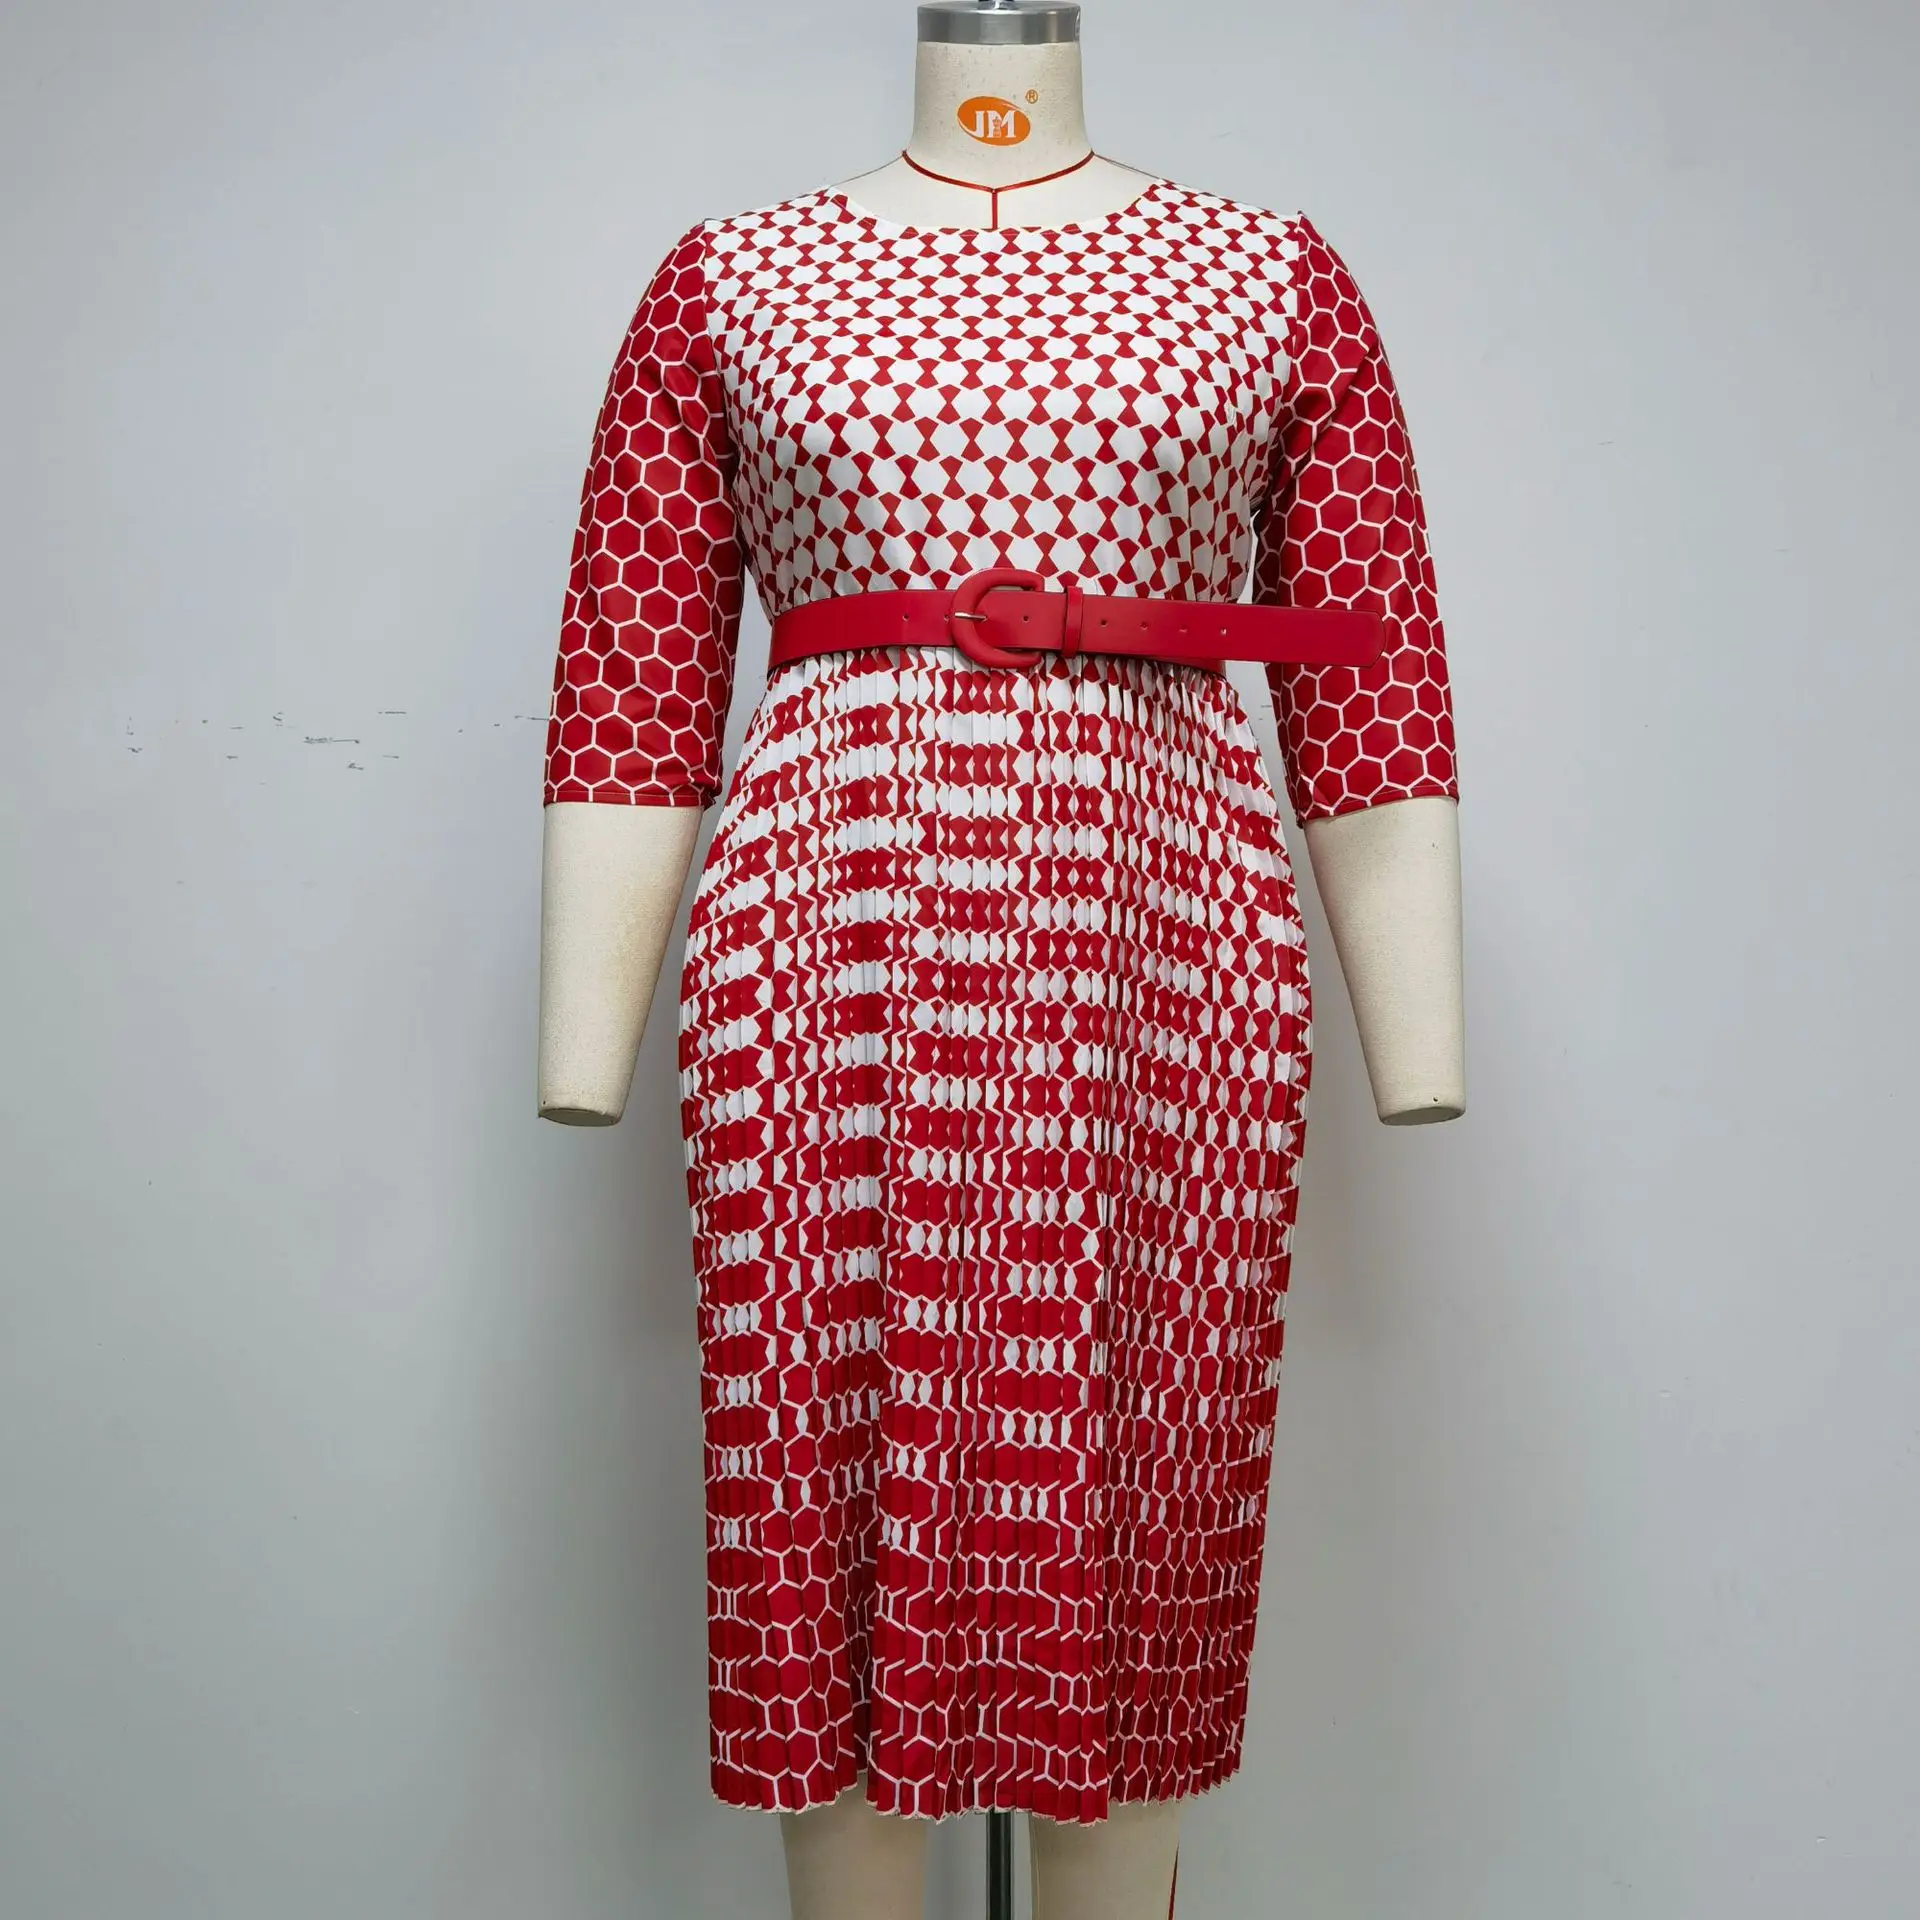 africa dress African women's spring and autumn plus size slim patchwork lace dress elegant dress long dress African clothing  2XL-6XL african wear